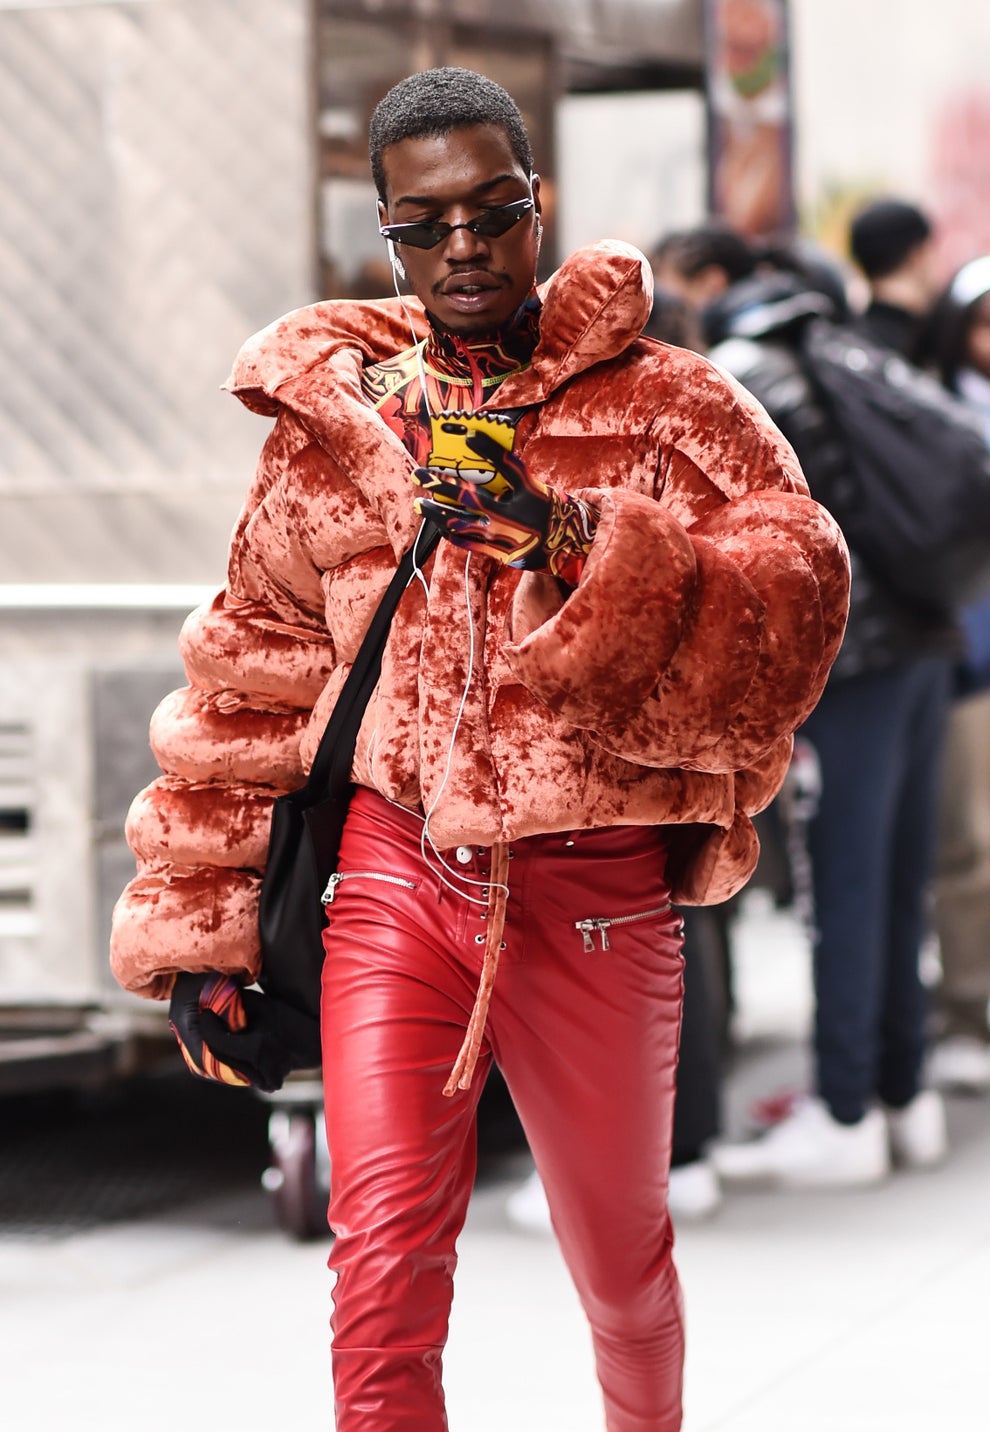 27 Street Style Photos From New York Fashion Week That'll Make You Feel ...